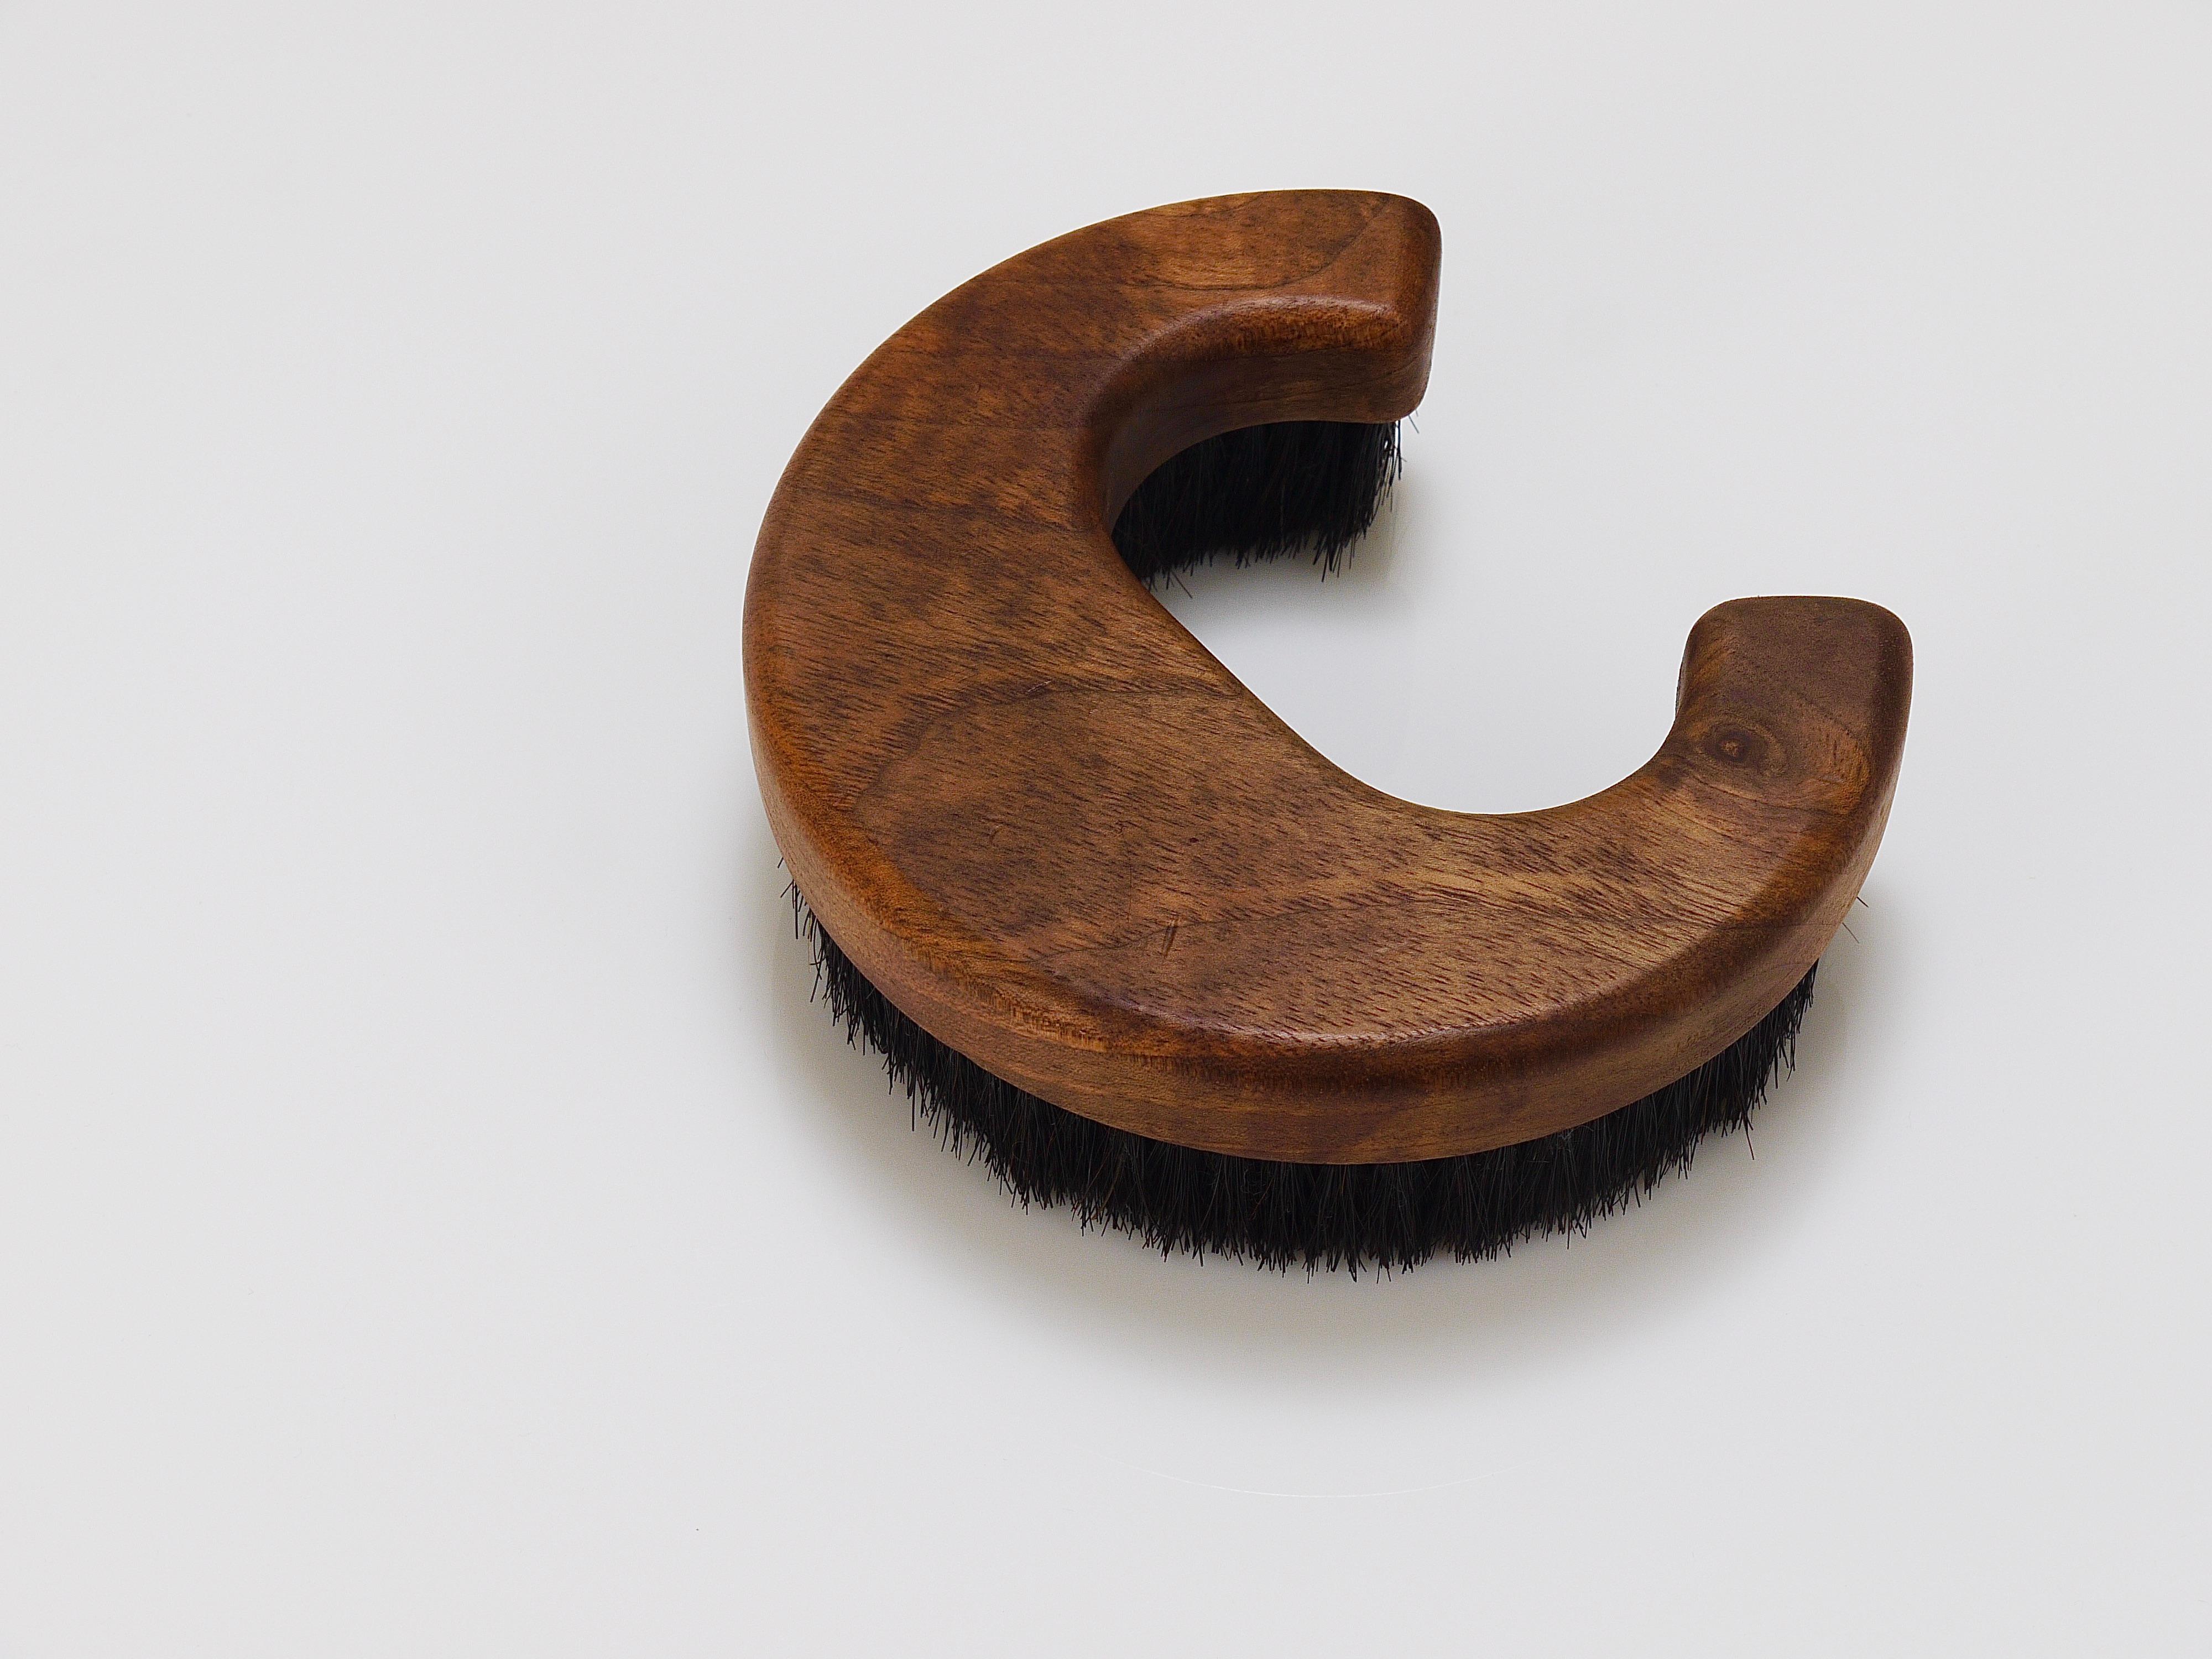 A beautiful modernist clothes or coat brush in the shape of the letter C from the 1960s. Designed and executed by Carl Aubock III, Vienna/Austria. Handmade of walnut and natural horse hair bristles. Signed in the wood. In very good condition.